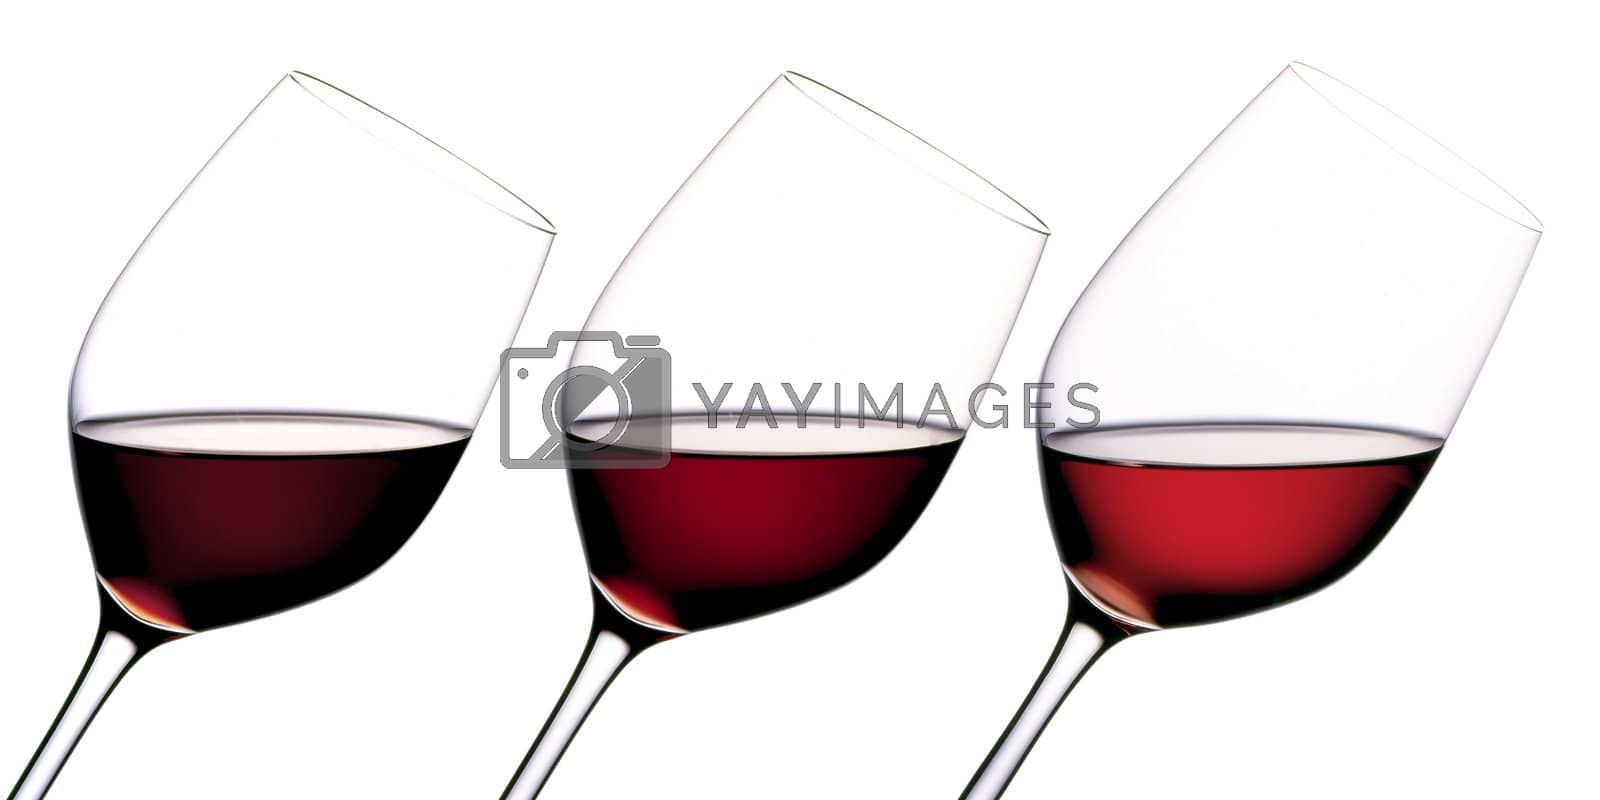 Royalty free image of Red Wine by lognetic